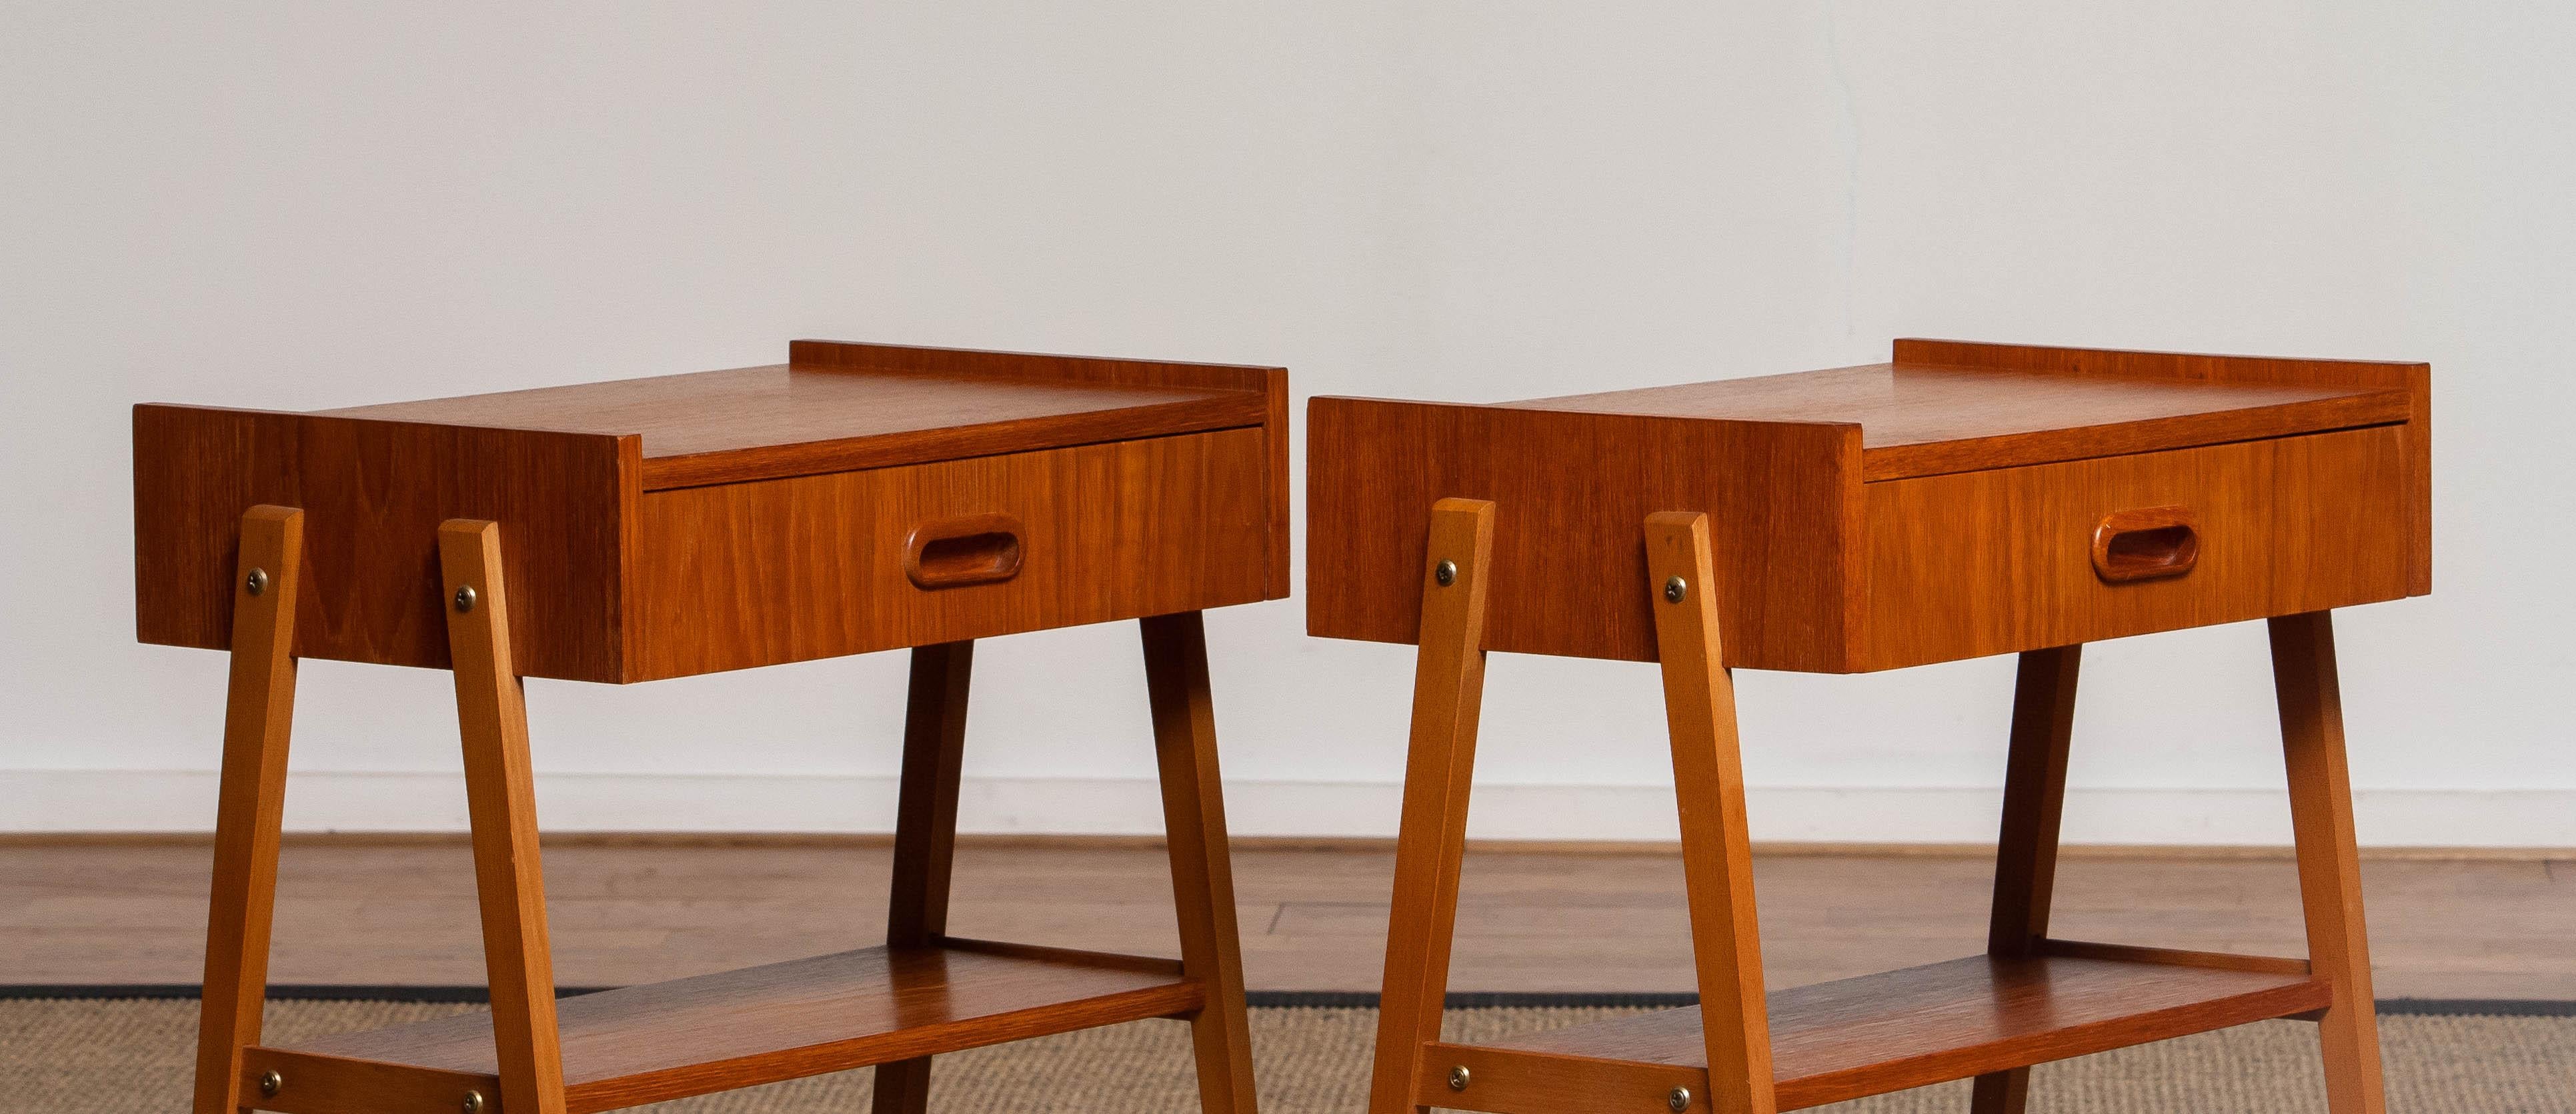 Mid-20th Century Pair Teak Nightstands / Bedside Tables by Ulferts Möbler from Sweden in 1950's